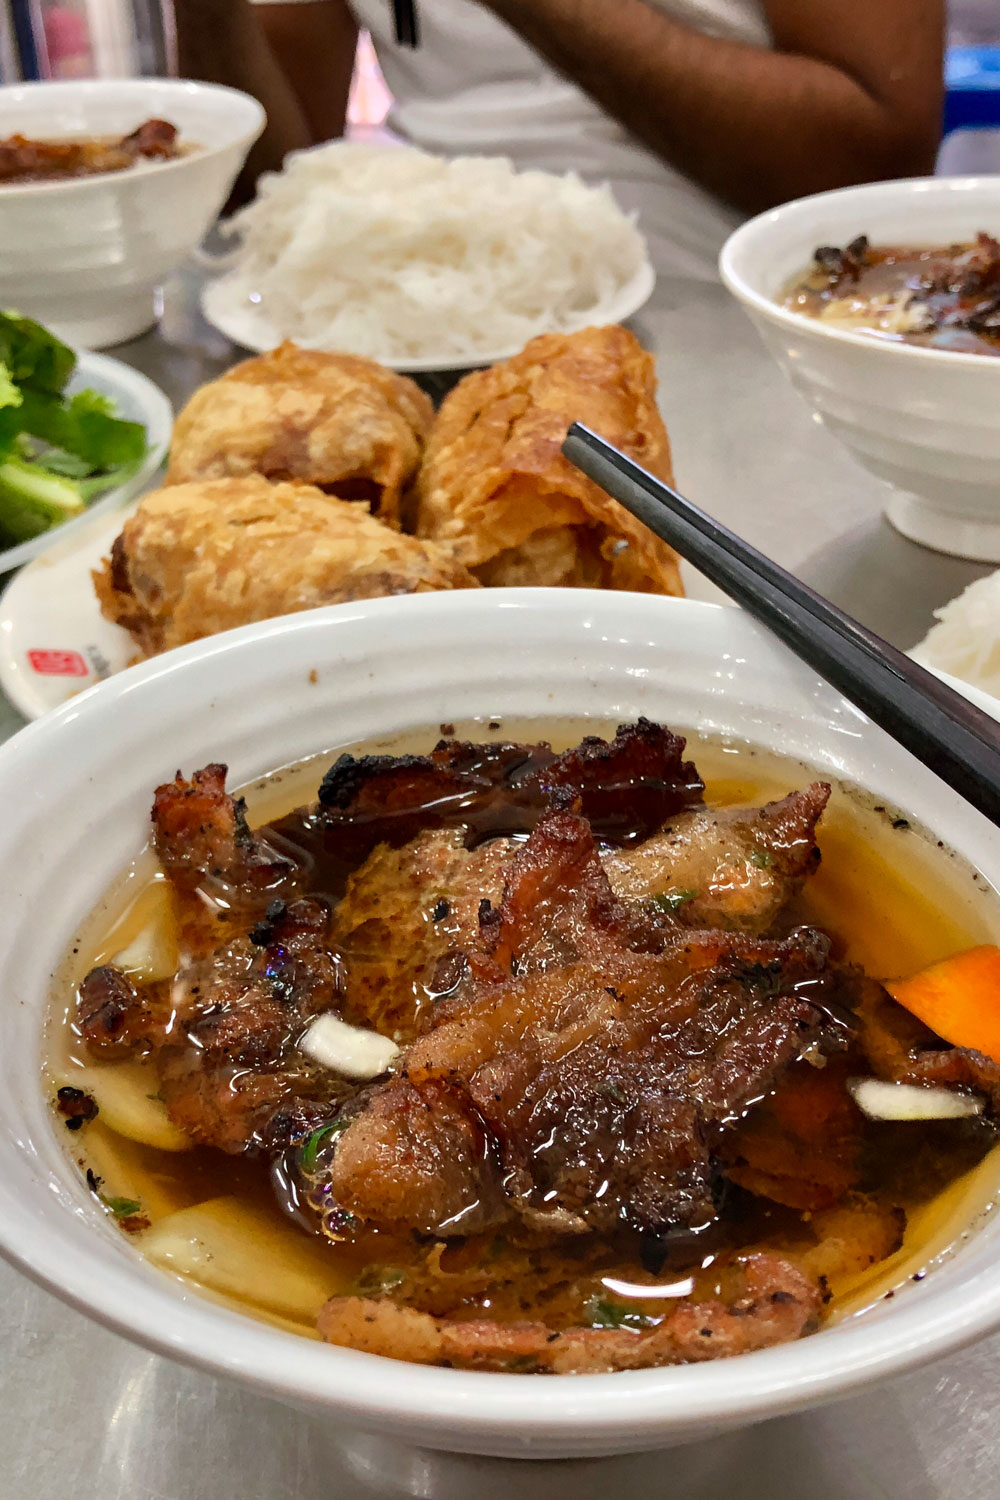 Bun Cha in a bowl with other foods in the backgorund.